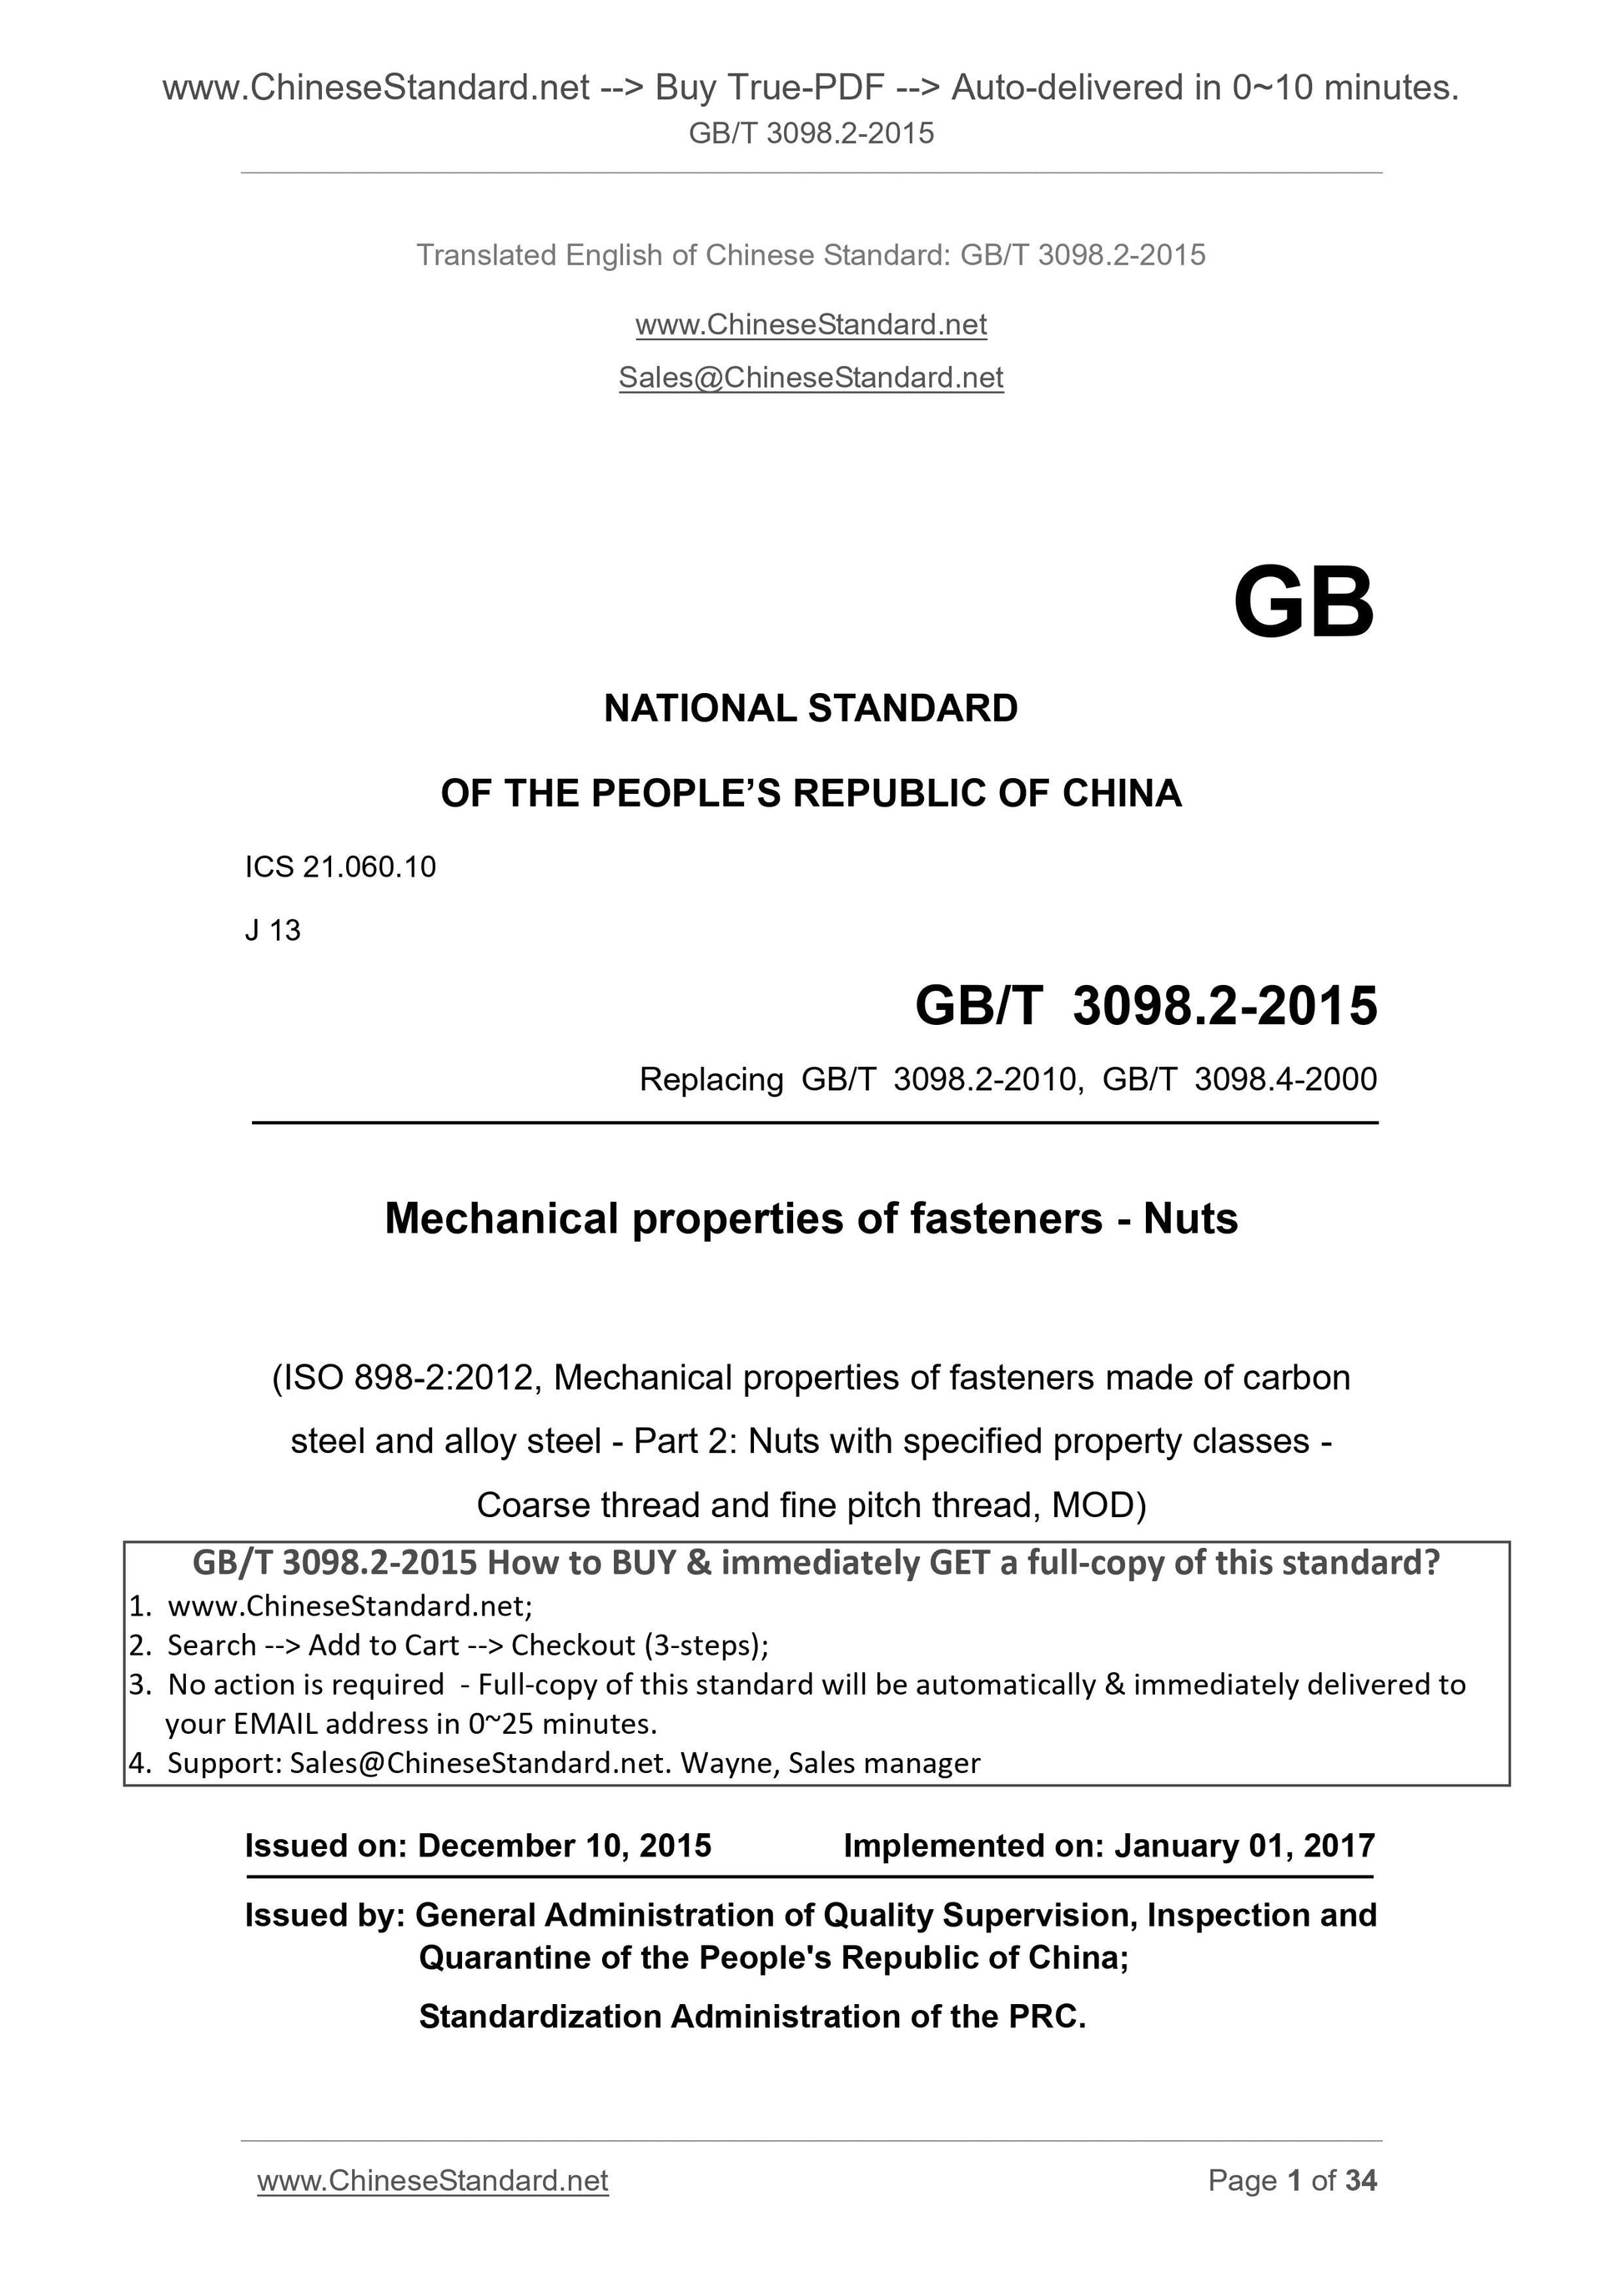 GB/T 3098.2-2015 Page 1